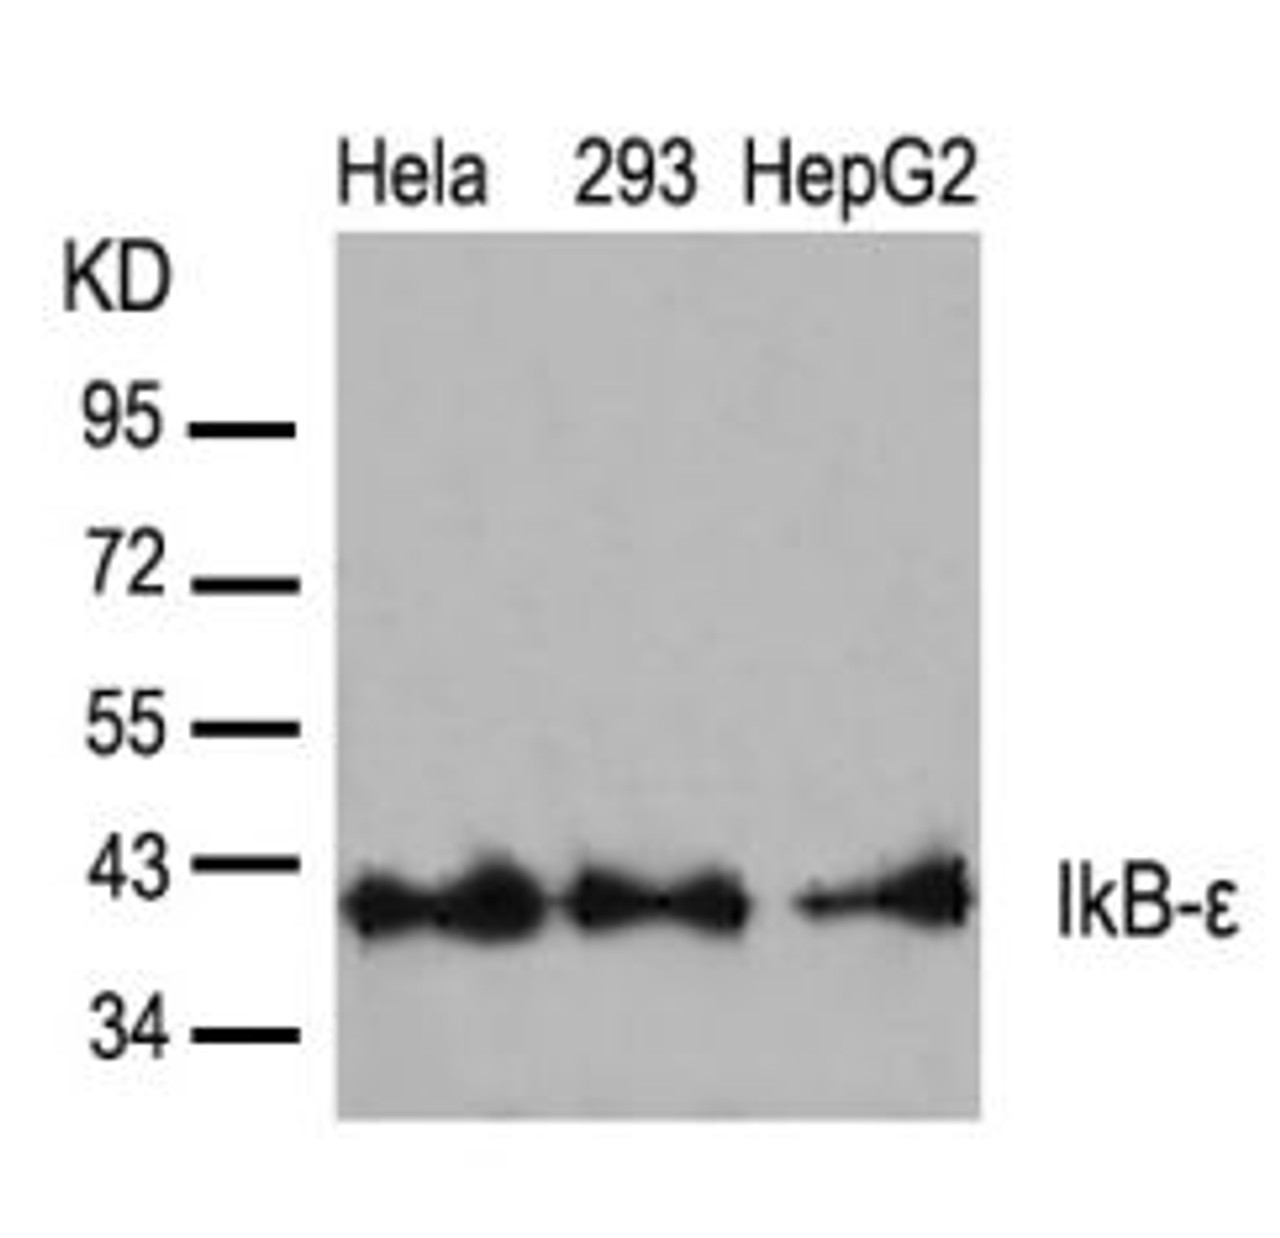 Western blot analysis of lysed extracts from HeLa, 293 and HepG2 cells using IkB-&#949; (Ab-22) .